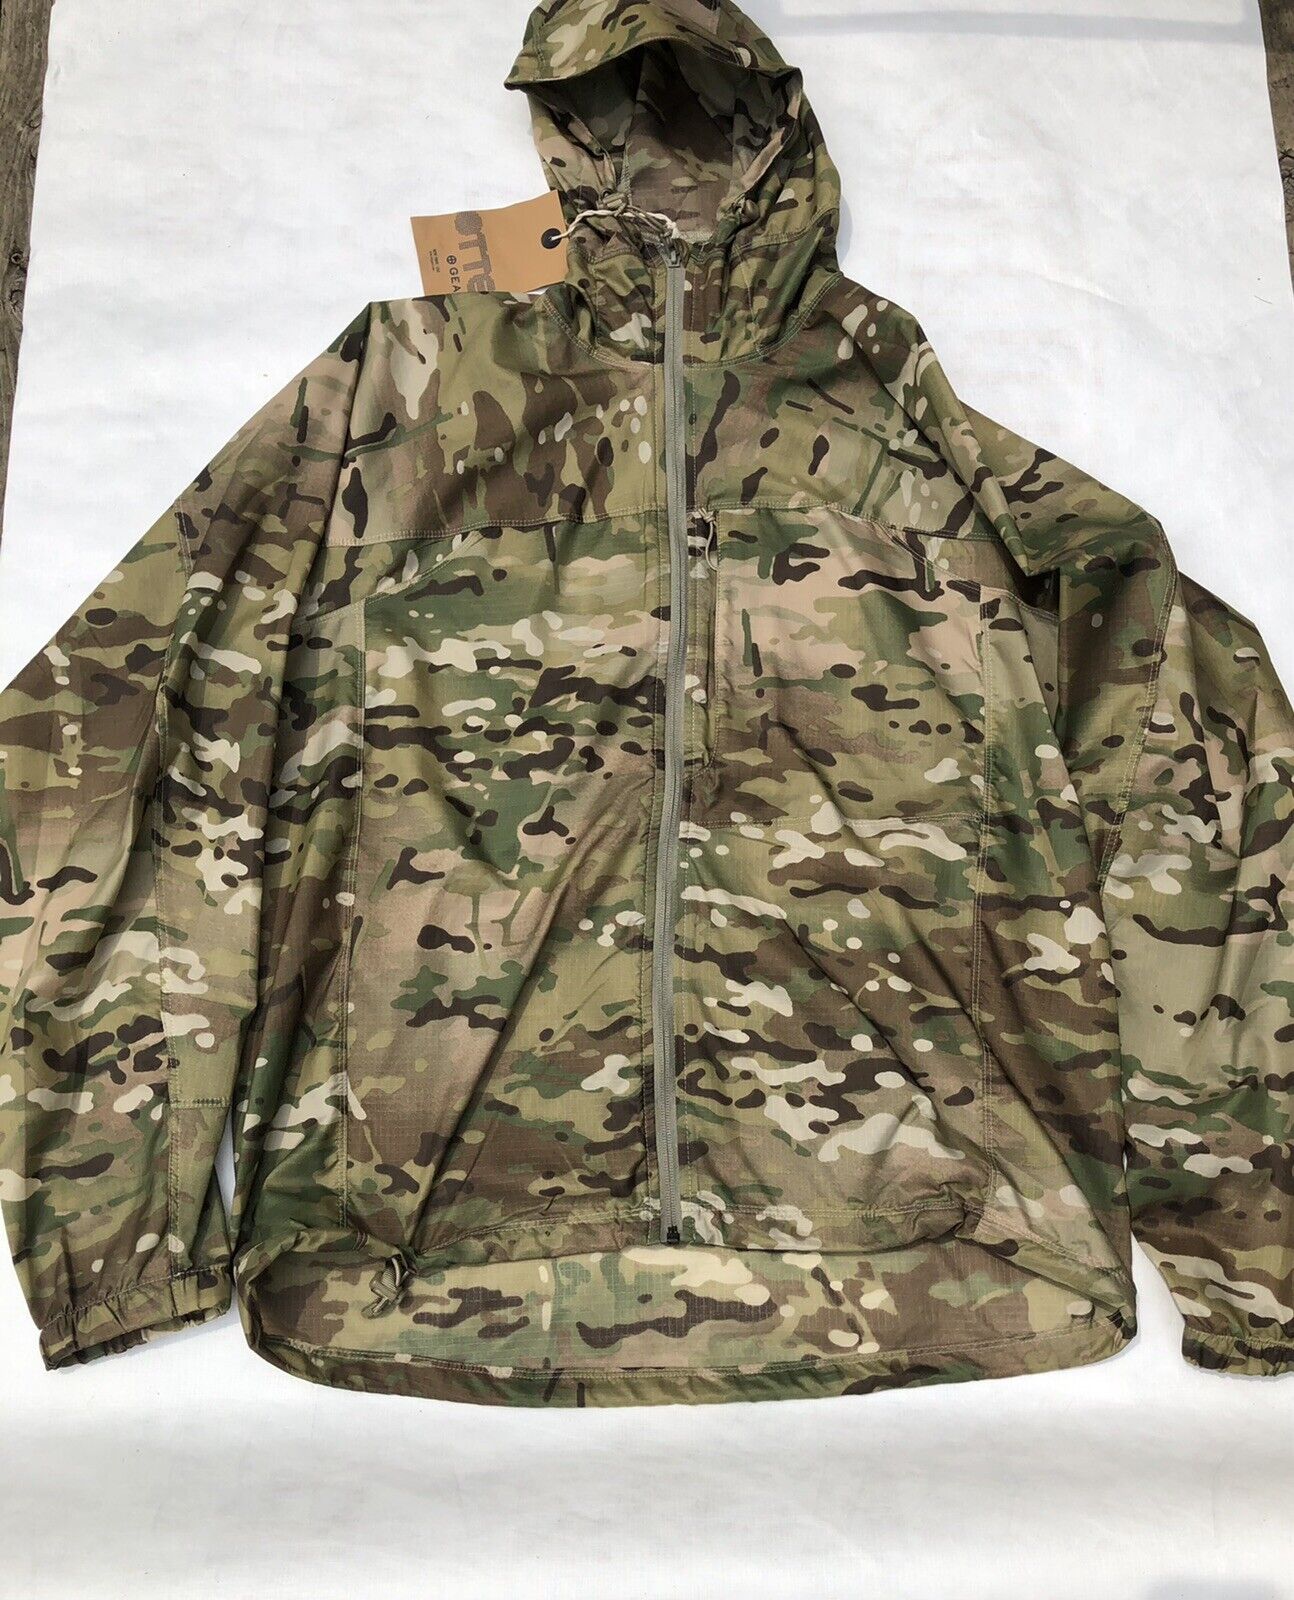 Otte Gear Wind Jacket  Shirt X-Large Mens Multicam Brand New With Tags.